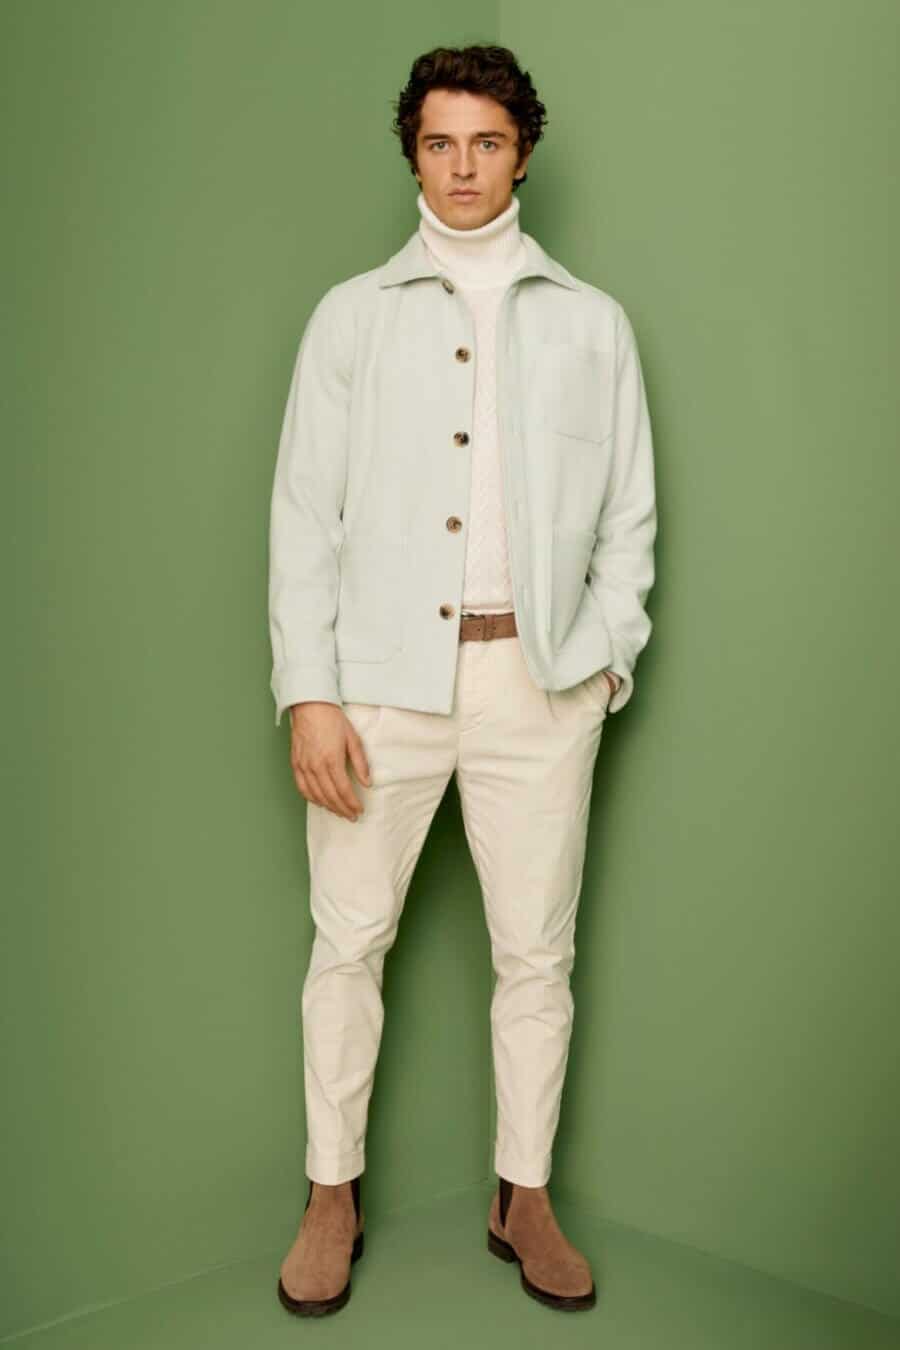 Men's all white outfit with white jeans, turtleneck and jacket